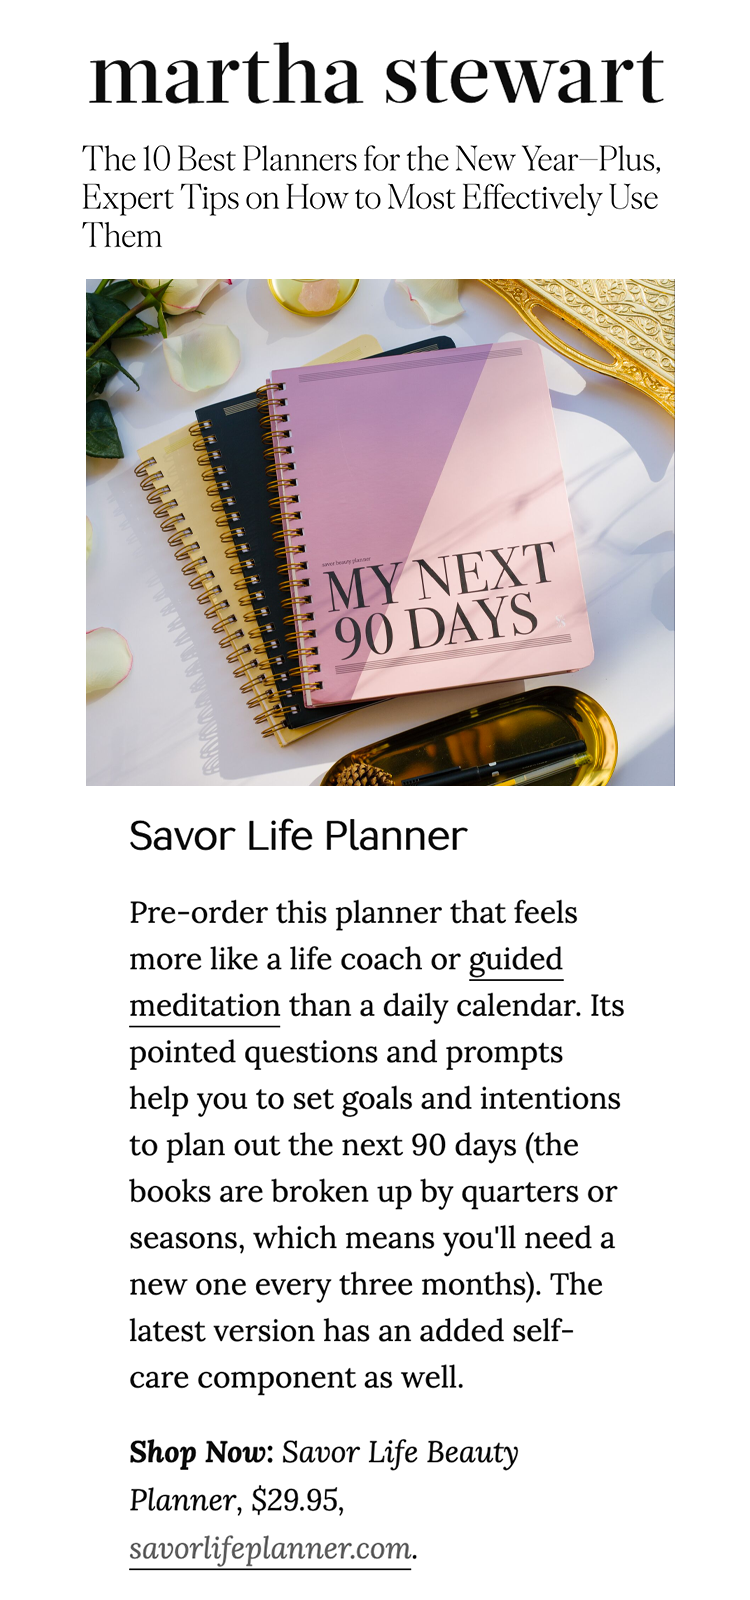 Martha Stewart: The 10 Best Planners for the New Year—Plus, Expert Tips on How to Most Effectively Use Them